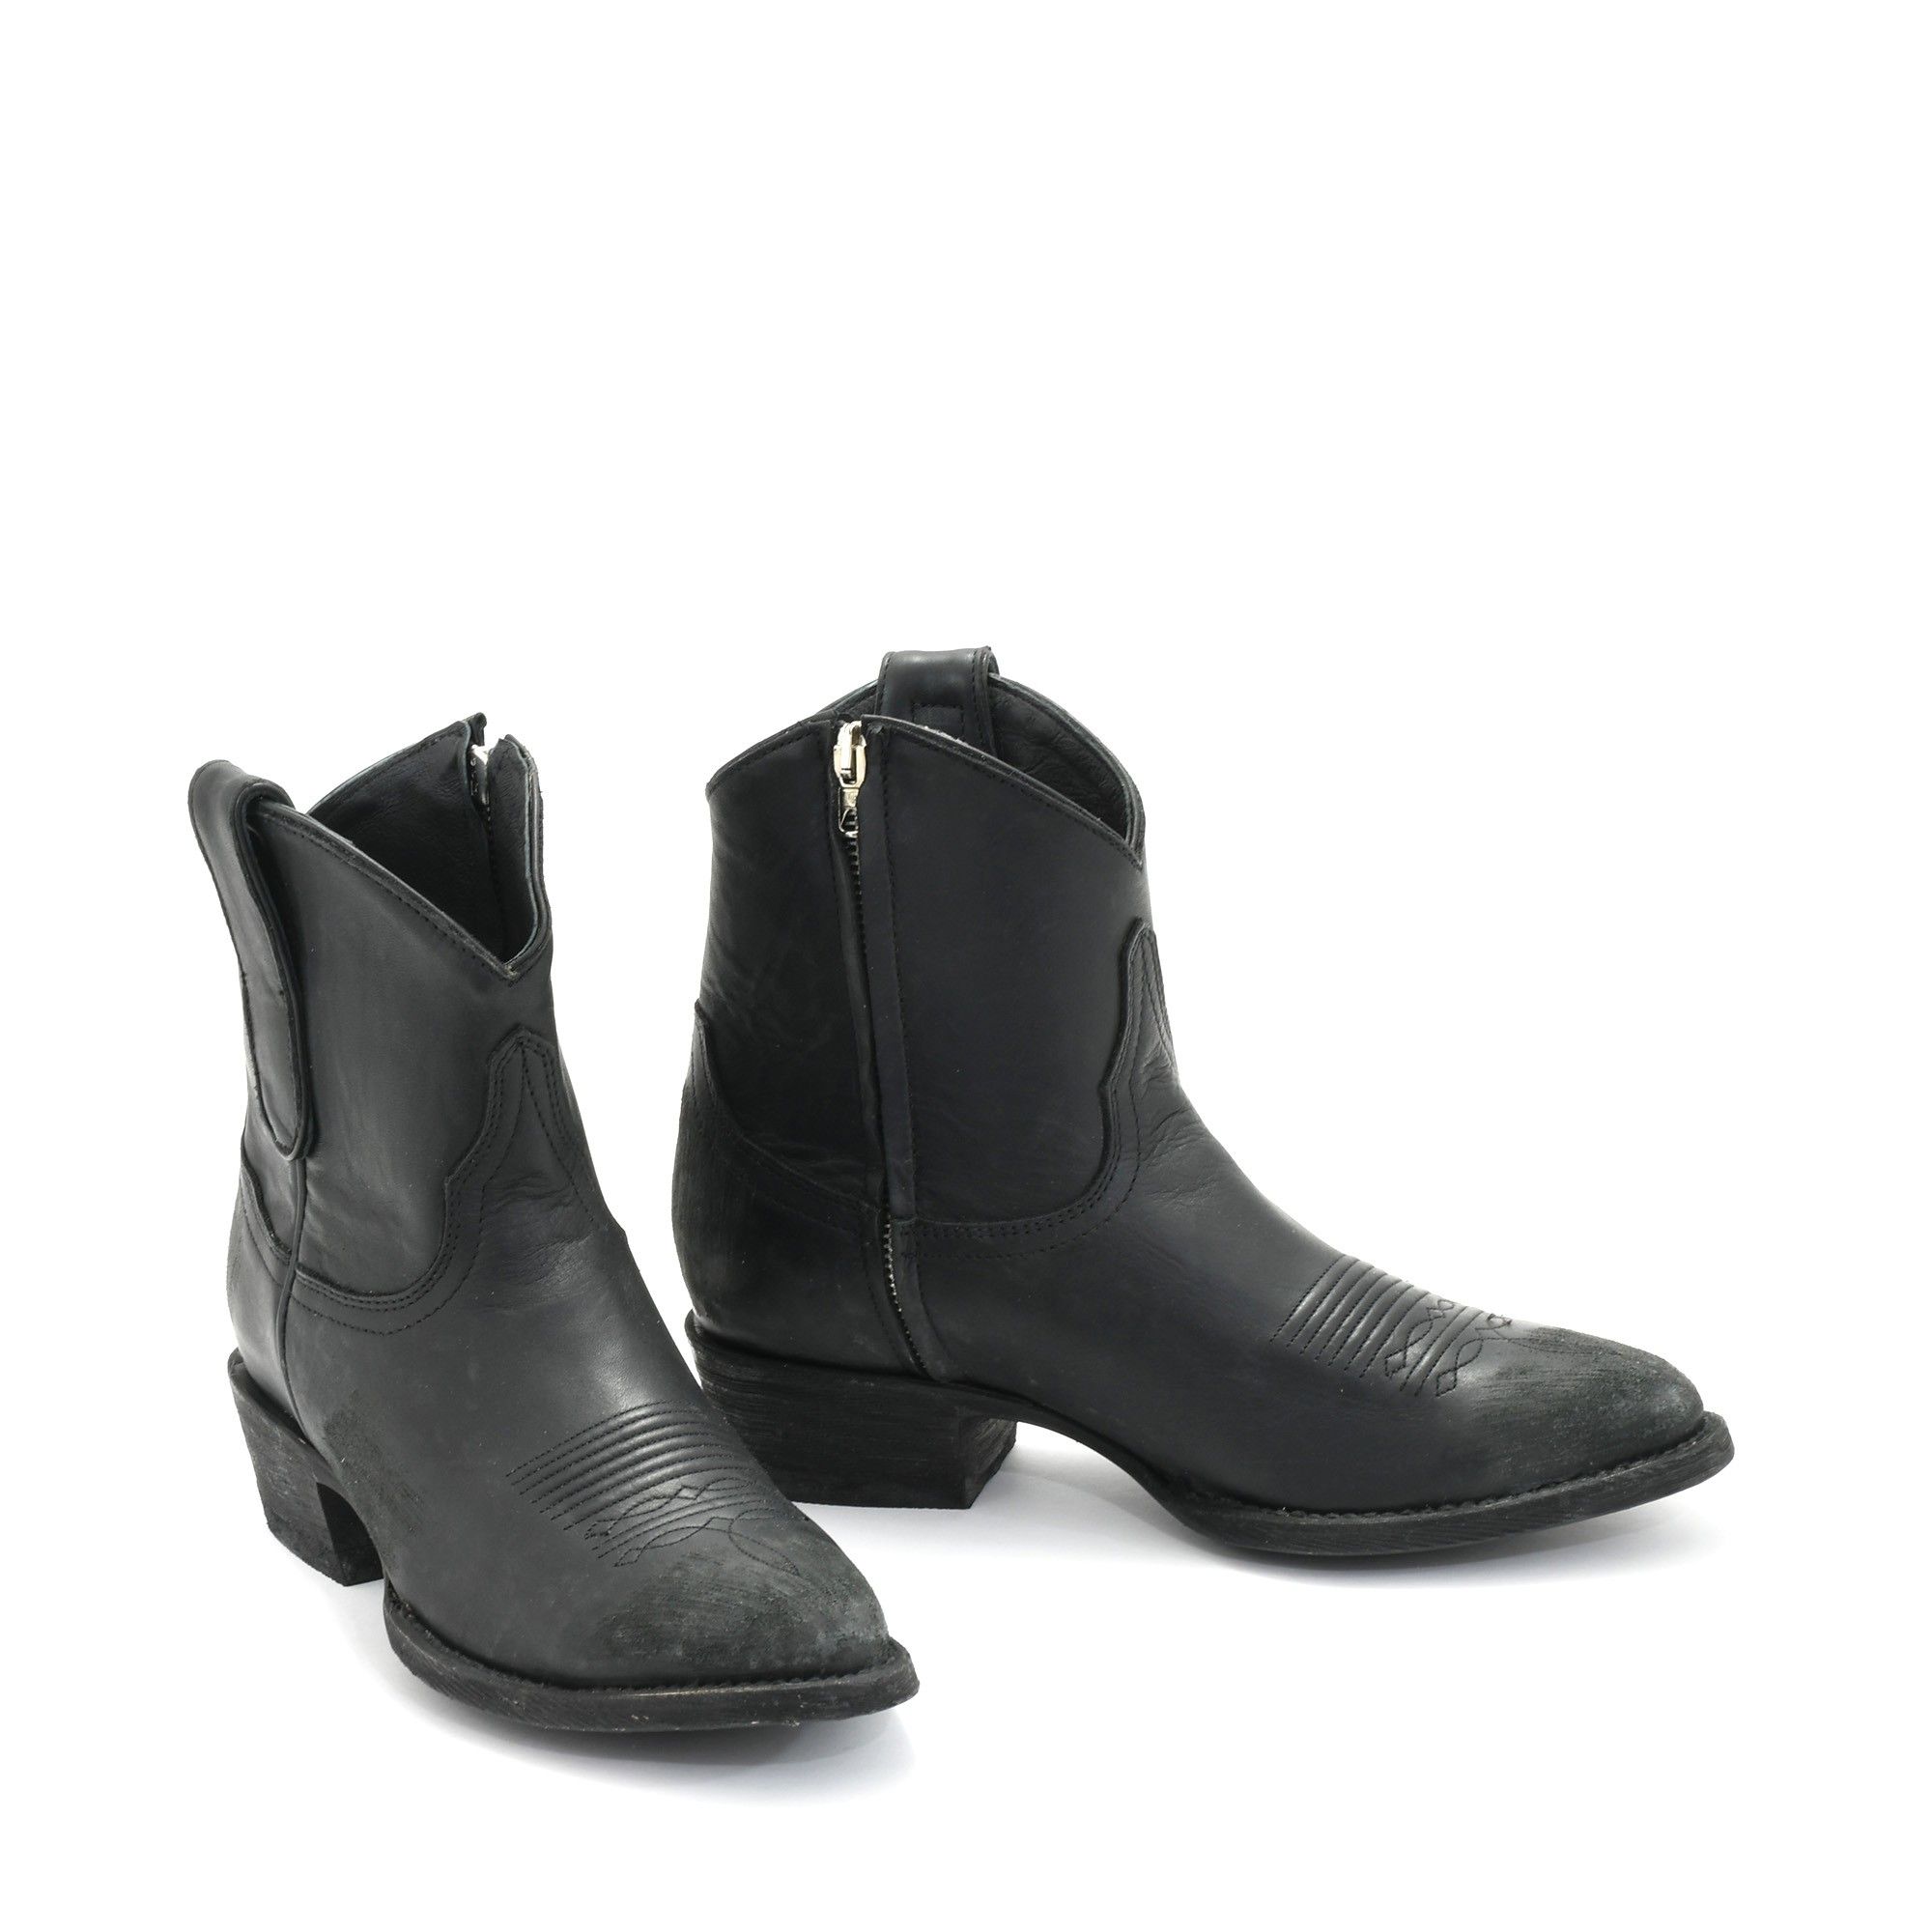 KULTURA BIS BLACK ROUNDED TOE ANKLE BOOTS WITH  COWBOY STYLE STITCHING AND  SIDE ZIP CLOSURE  Total heel height 1.6 Inches  100%